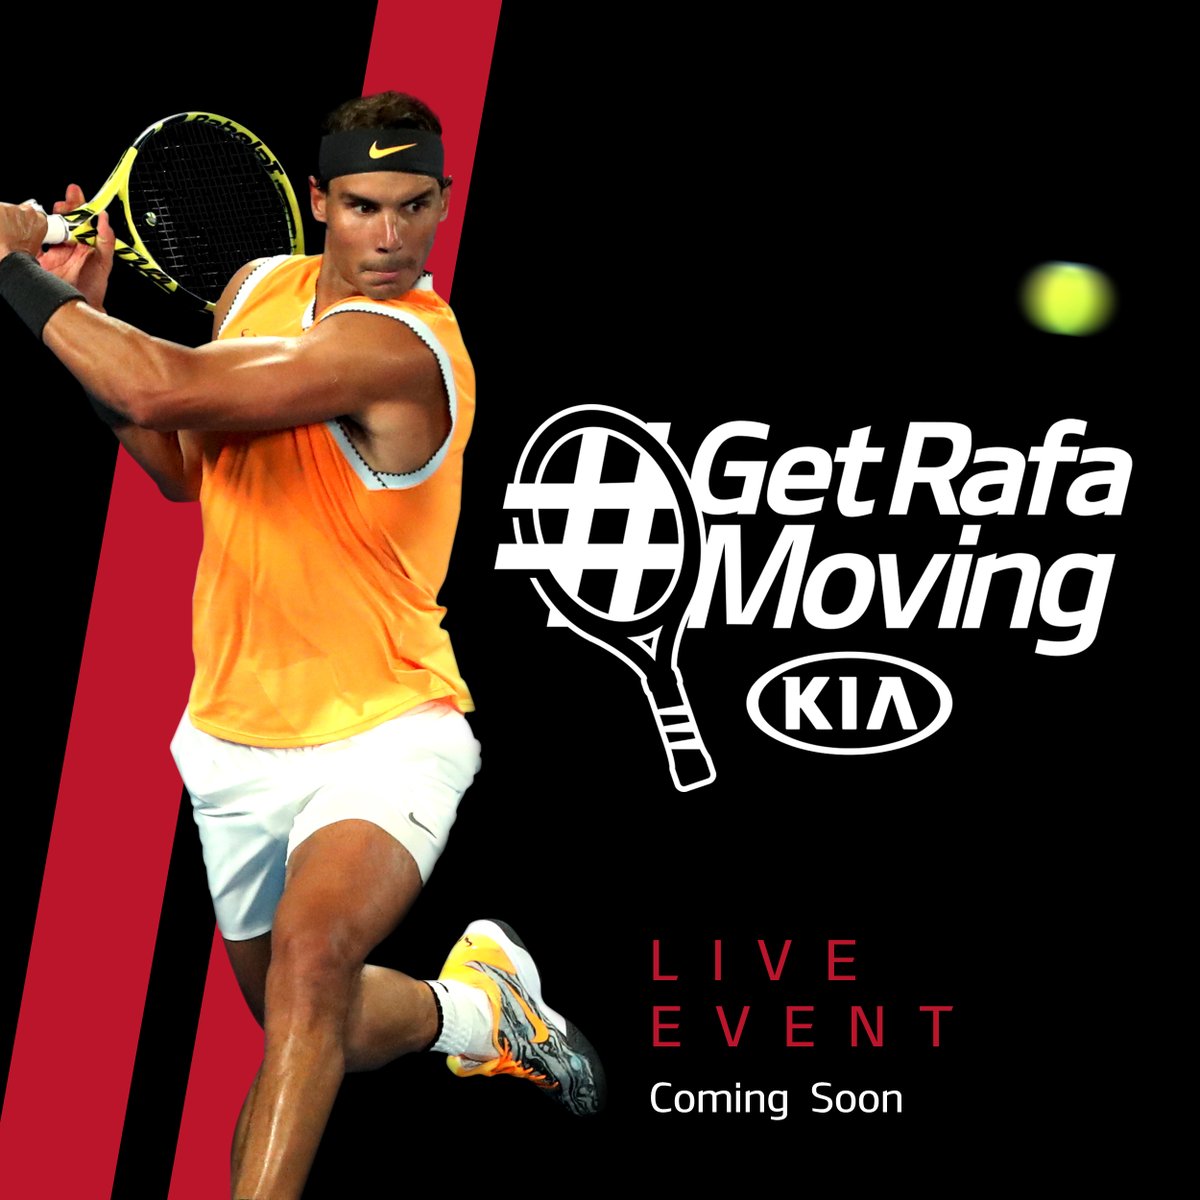 Tennis is coming back, so to help @RafaelNadal get ready we’ll be hosting an interactive live event, #GetRafaMoving. Coming soon!